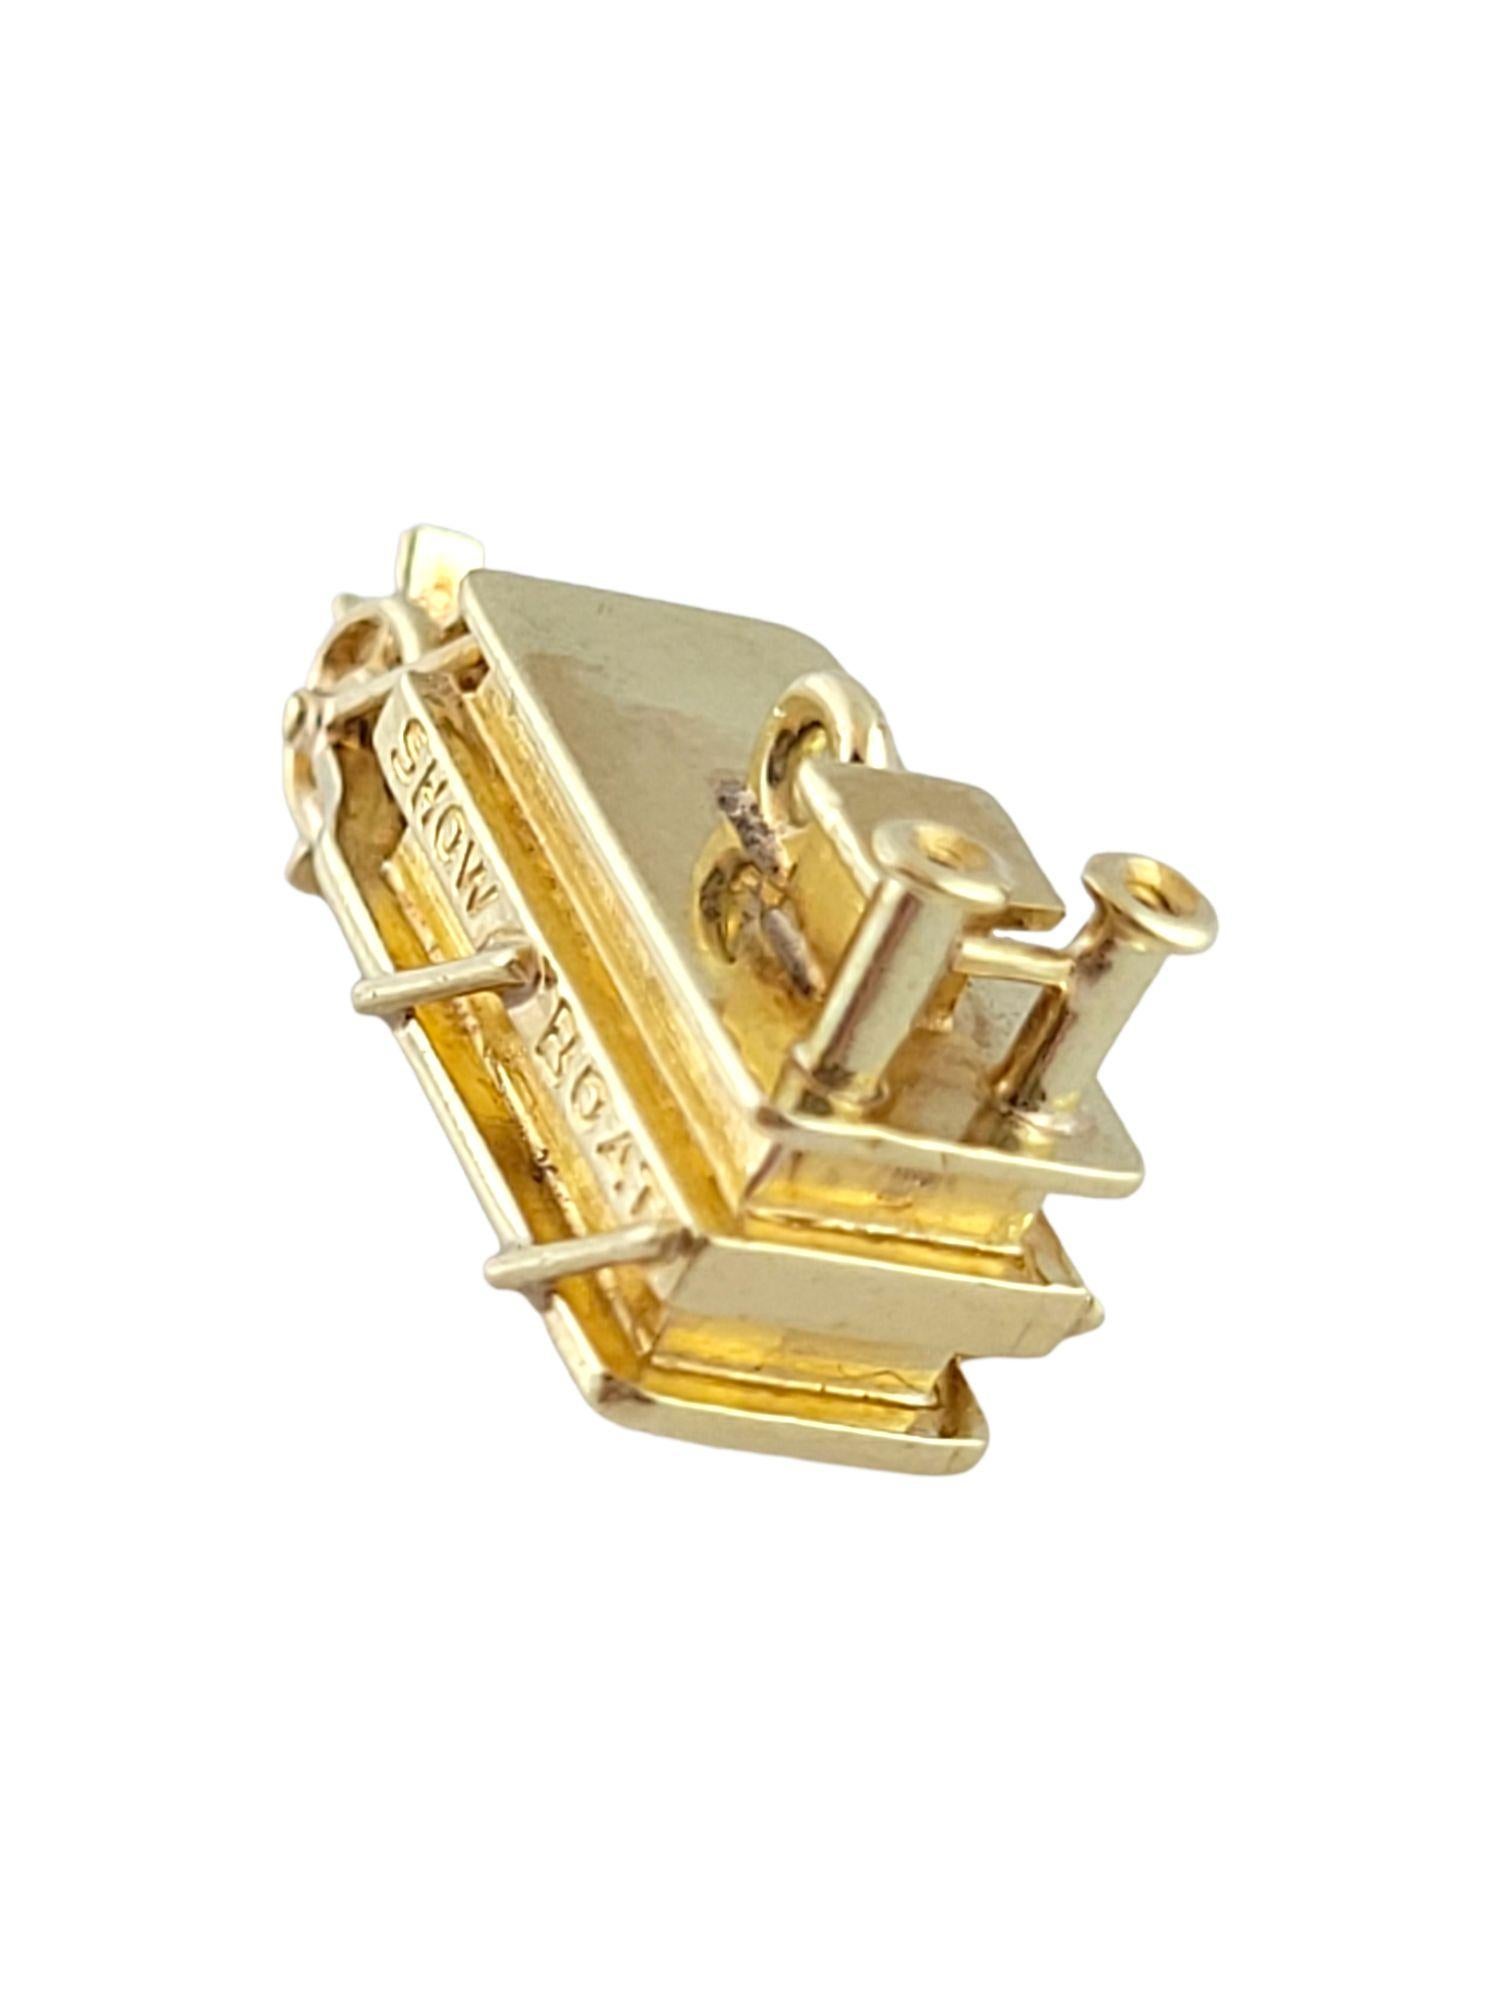 This adorable show boat charm is crafted from 14K yellow gold!

Size: 10.9mm X 18.9mm X 7mm

Weight: 2.78 g/ 1.7 dwt

Hallmark: 14K

Very good condition, professionally polished.

Will come packaged in a gift box or pouch (when possible) and will be